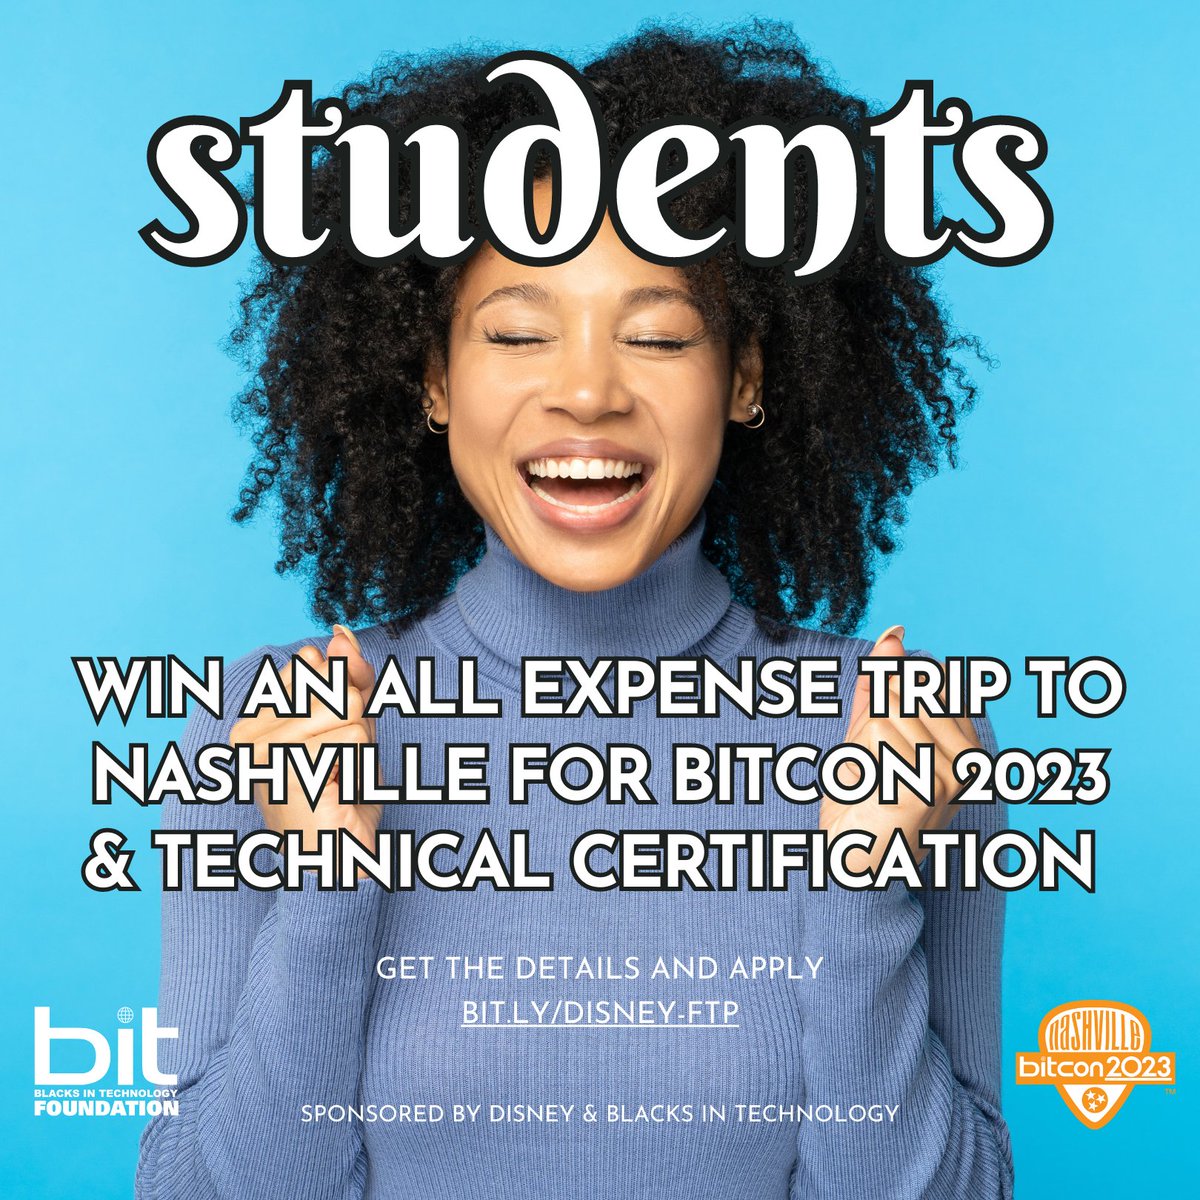 College techies apply and win an all expenses paid trip to BITCON 2023 in Nashville, TN Sept 5-7! Deadline 8/11. Disney & BIT collaboration. Get the details and apply: bit.ly/disney-ftp #blacksintech #BlackTechTwitter #BlackTwitter